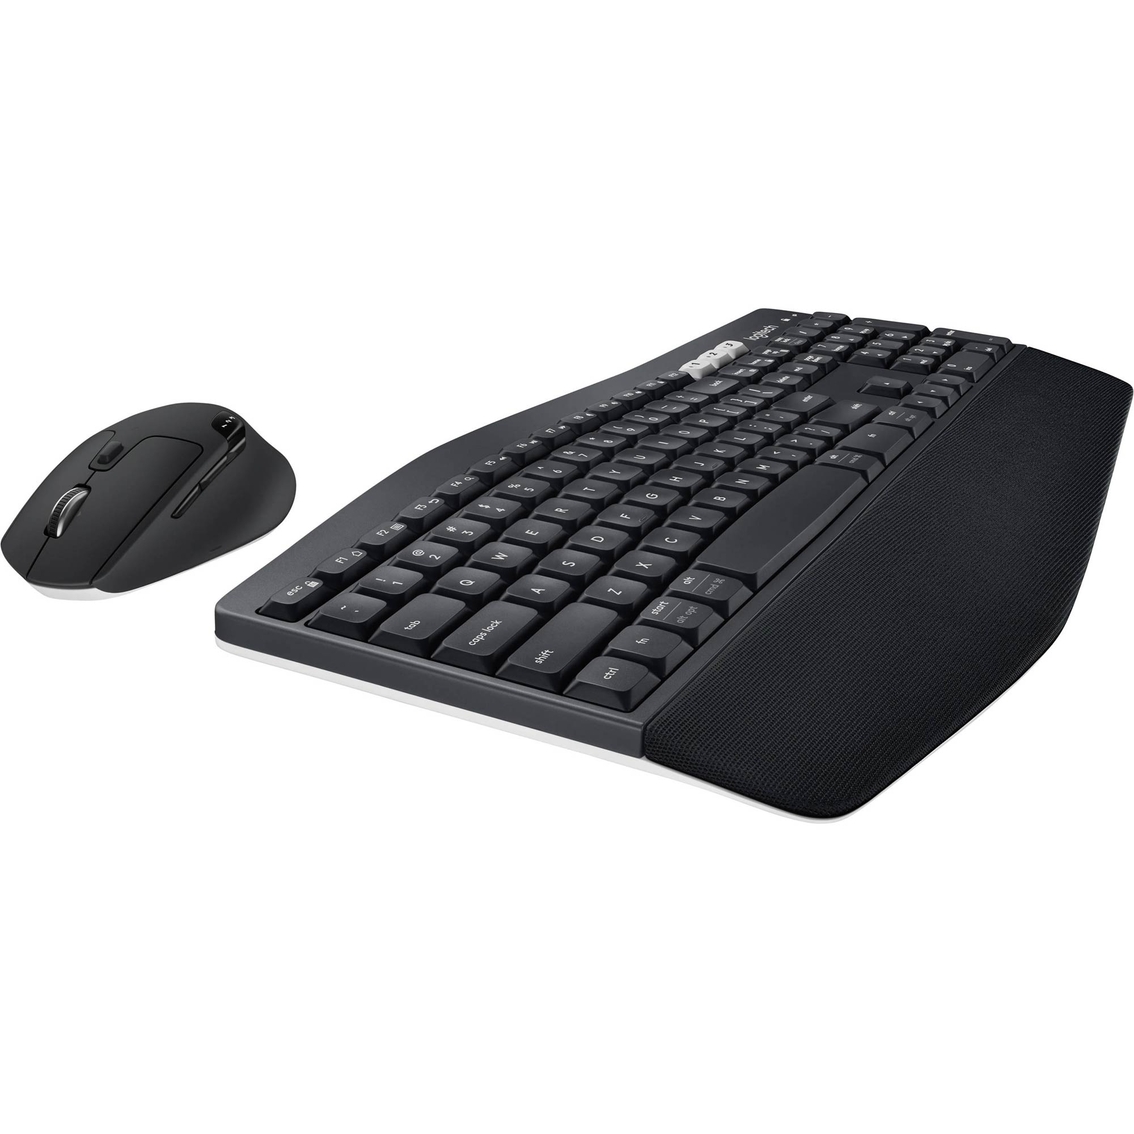 Logitech MK850 Performance Wireless Keyboard and Optical Mouse Combo - Image 3 of 5